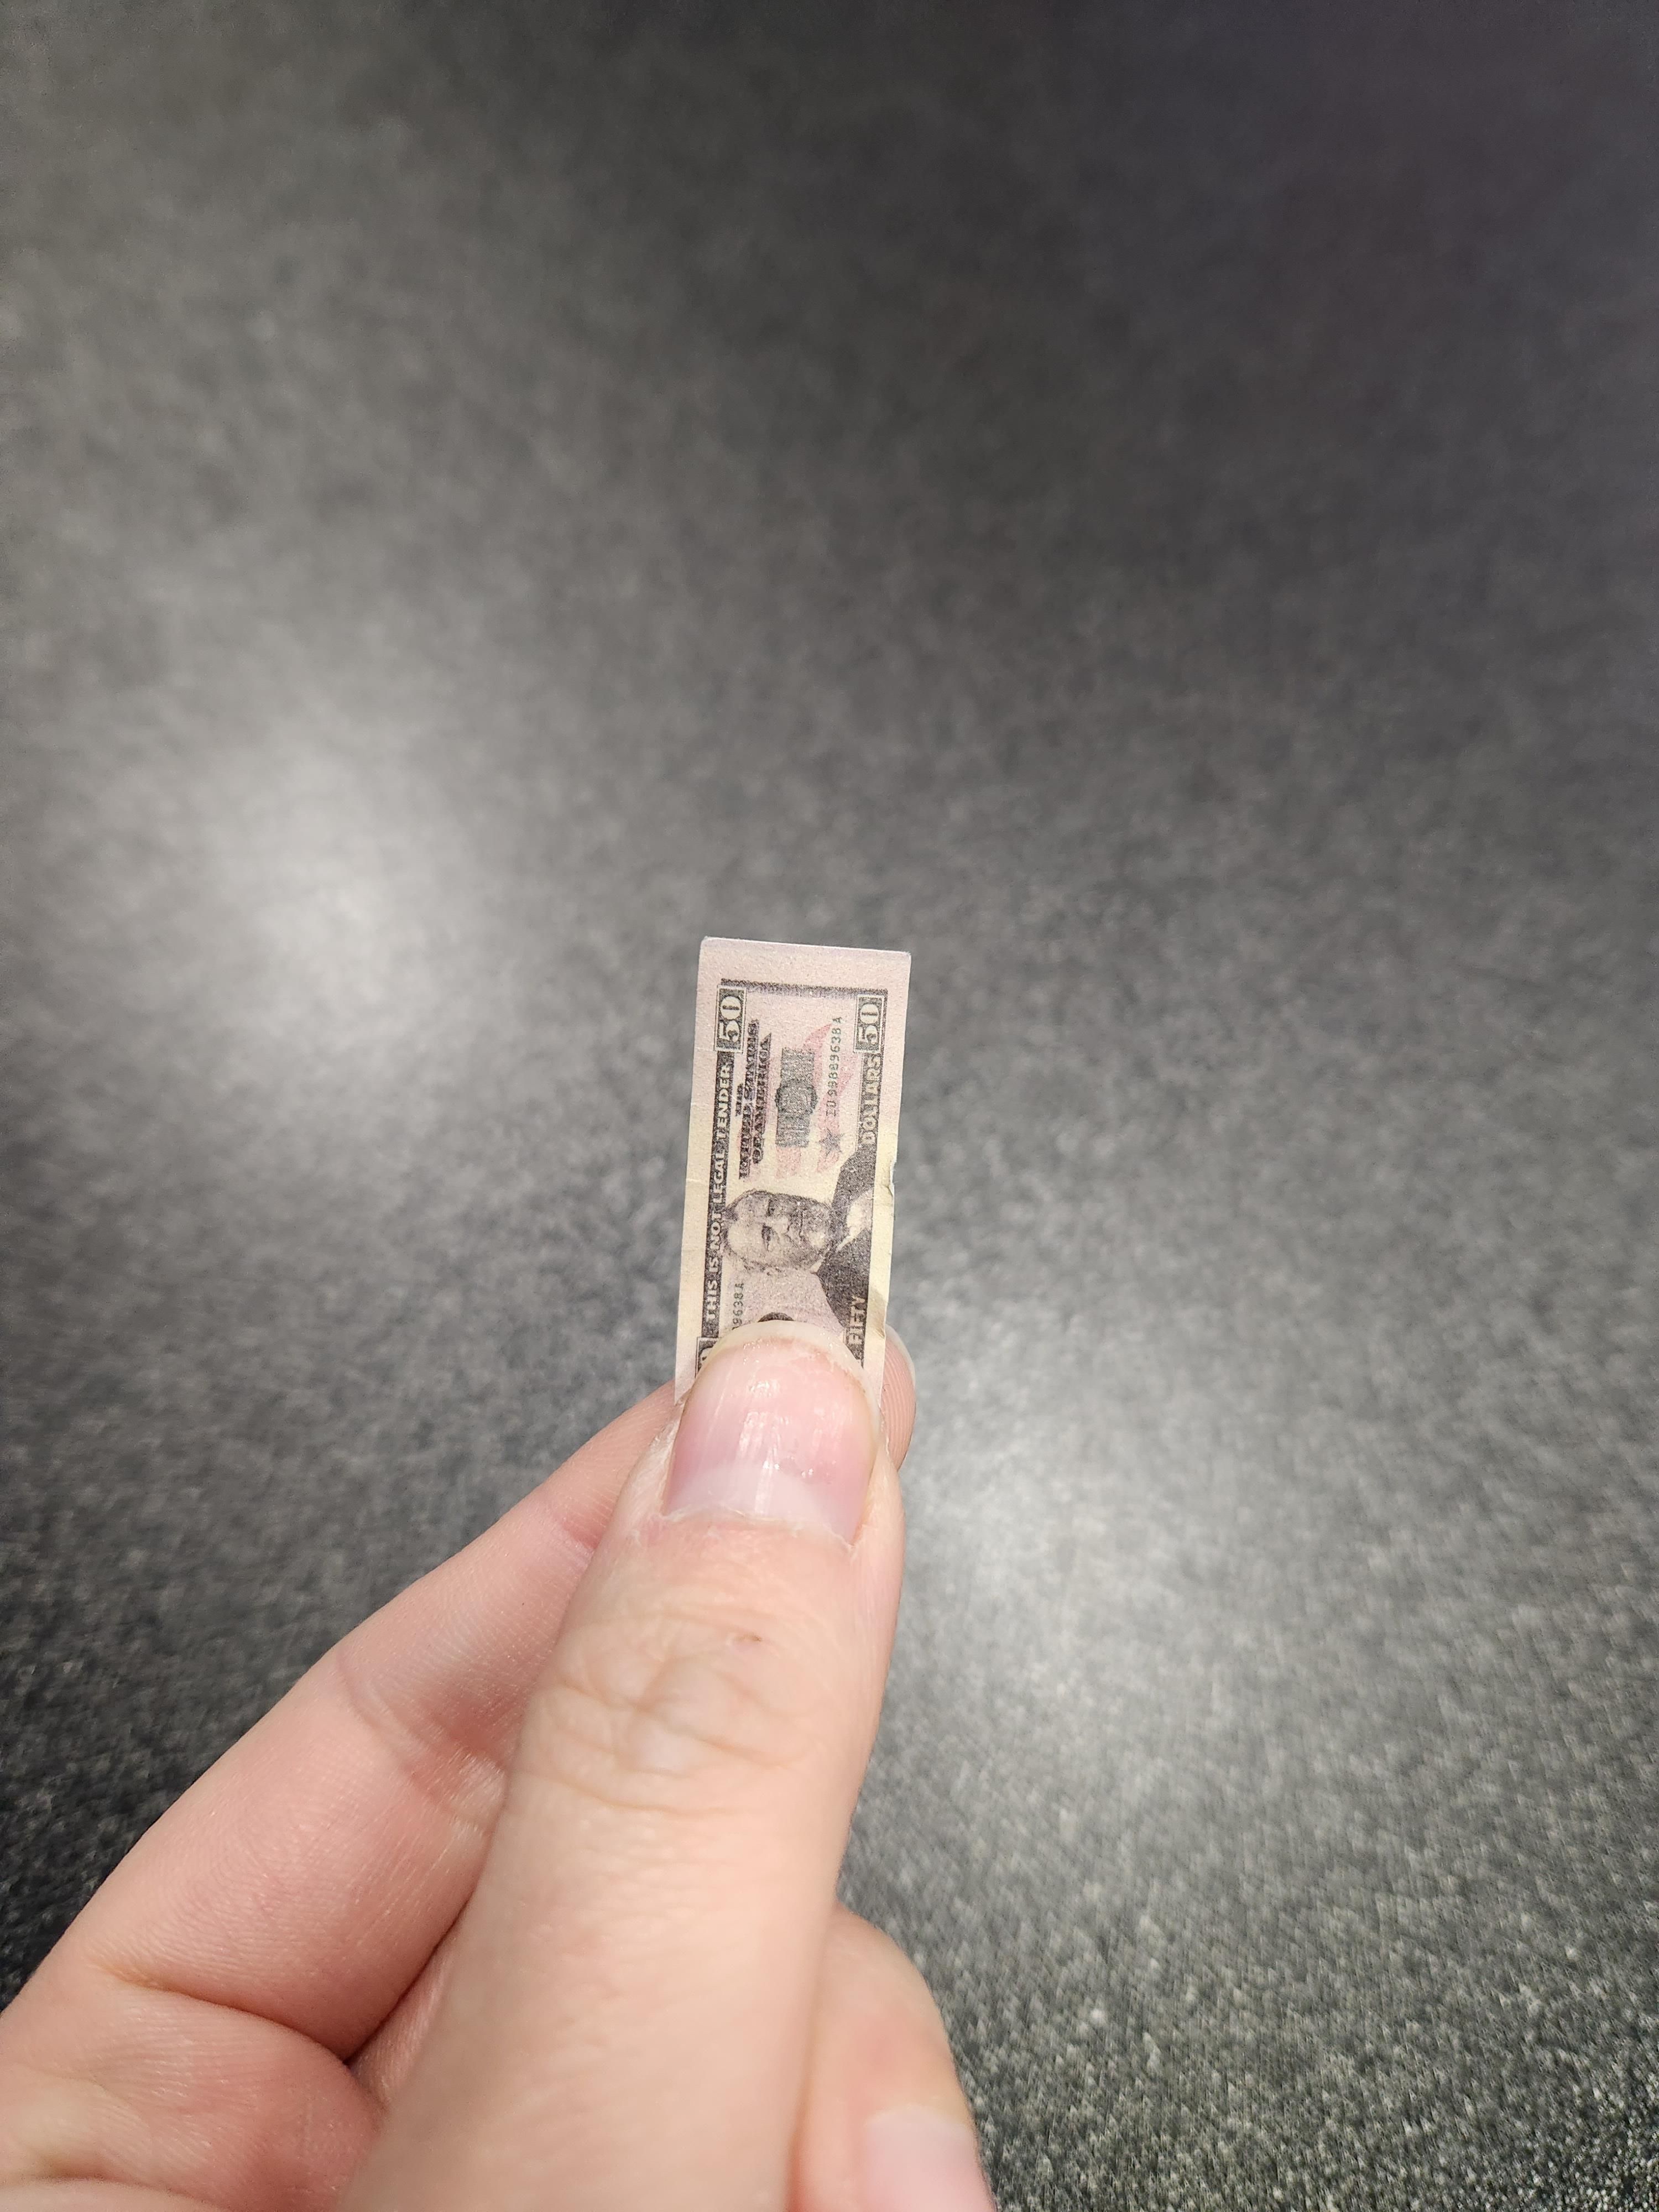 I found $50 at work today what should I spend it on?